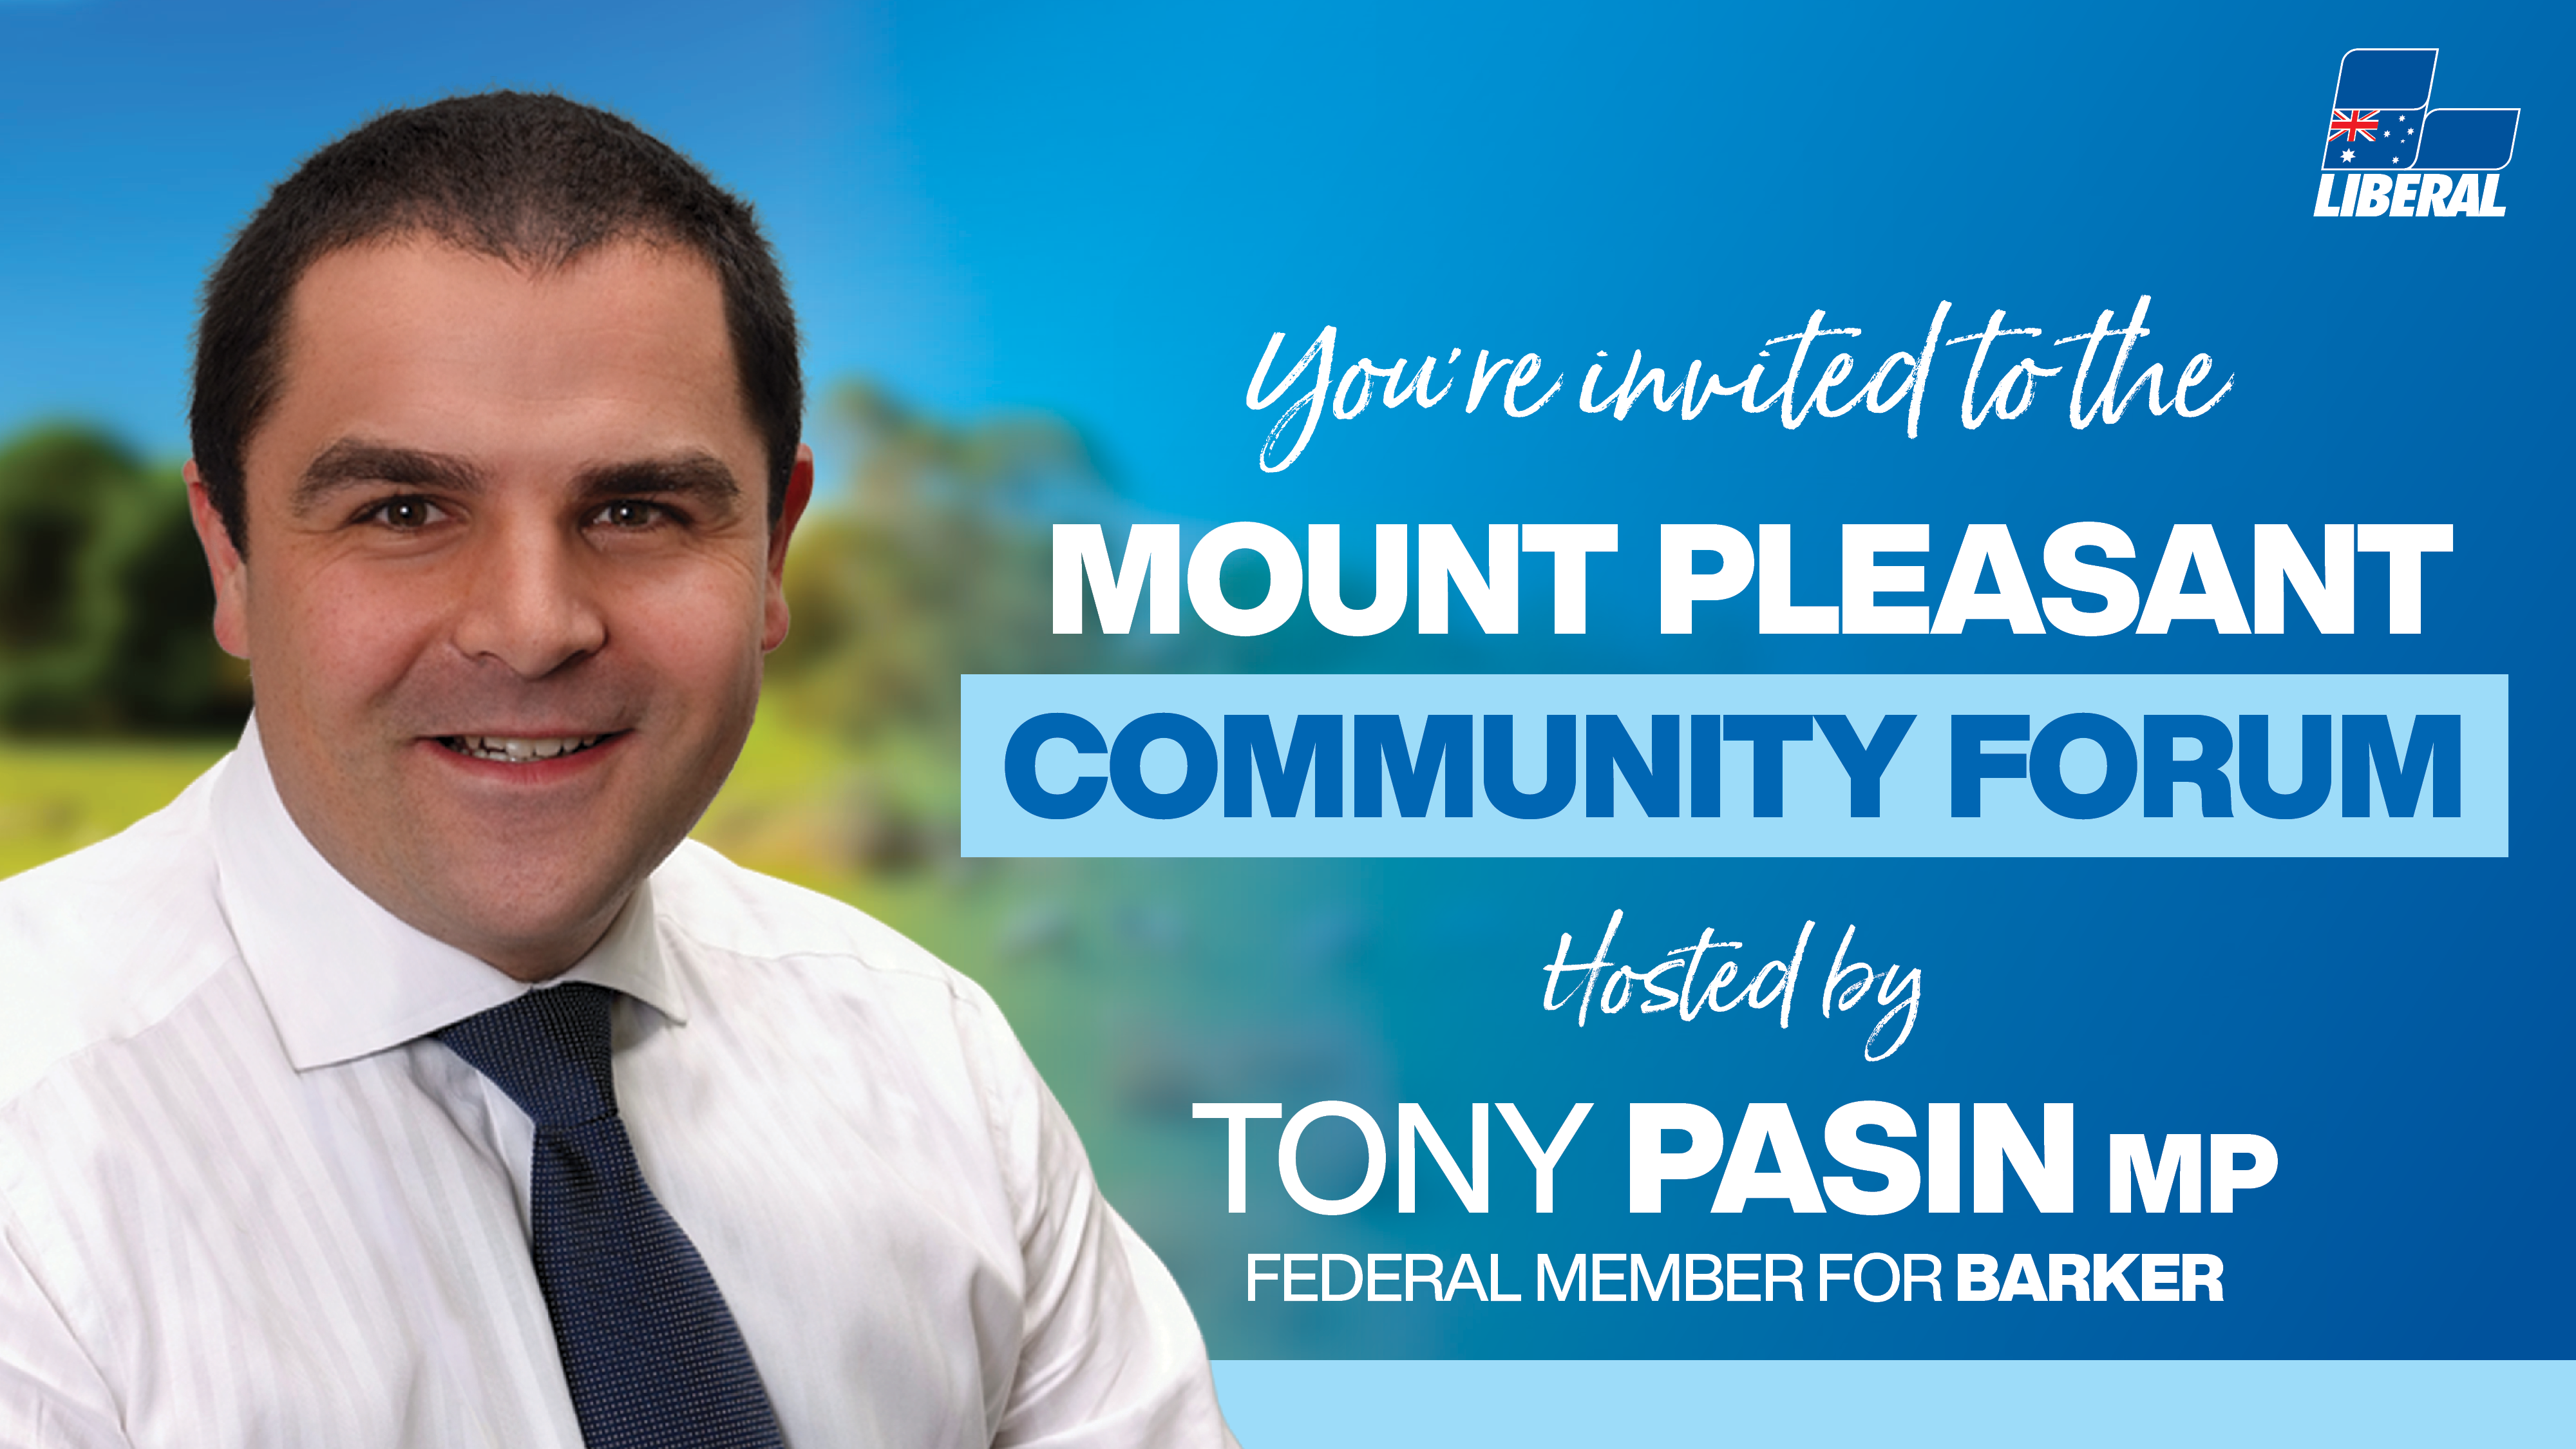 PASIN TO HOST COMMUNITY MEETING IN MOUNT PLEASANT